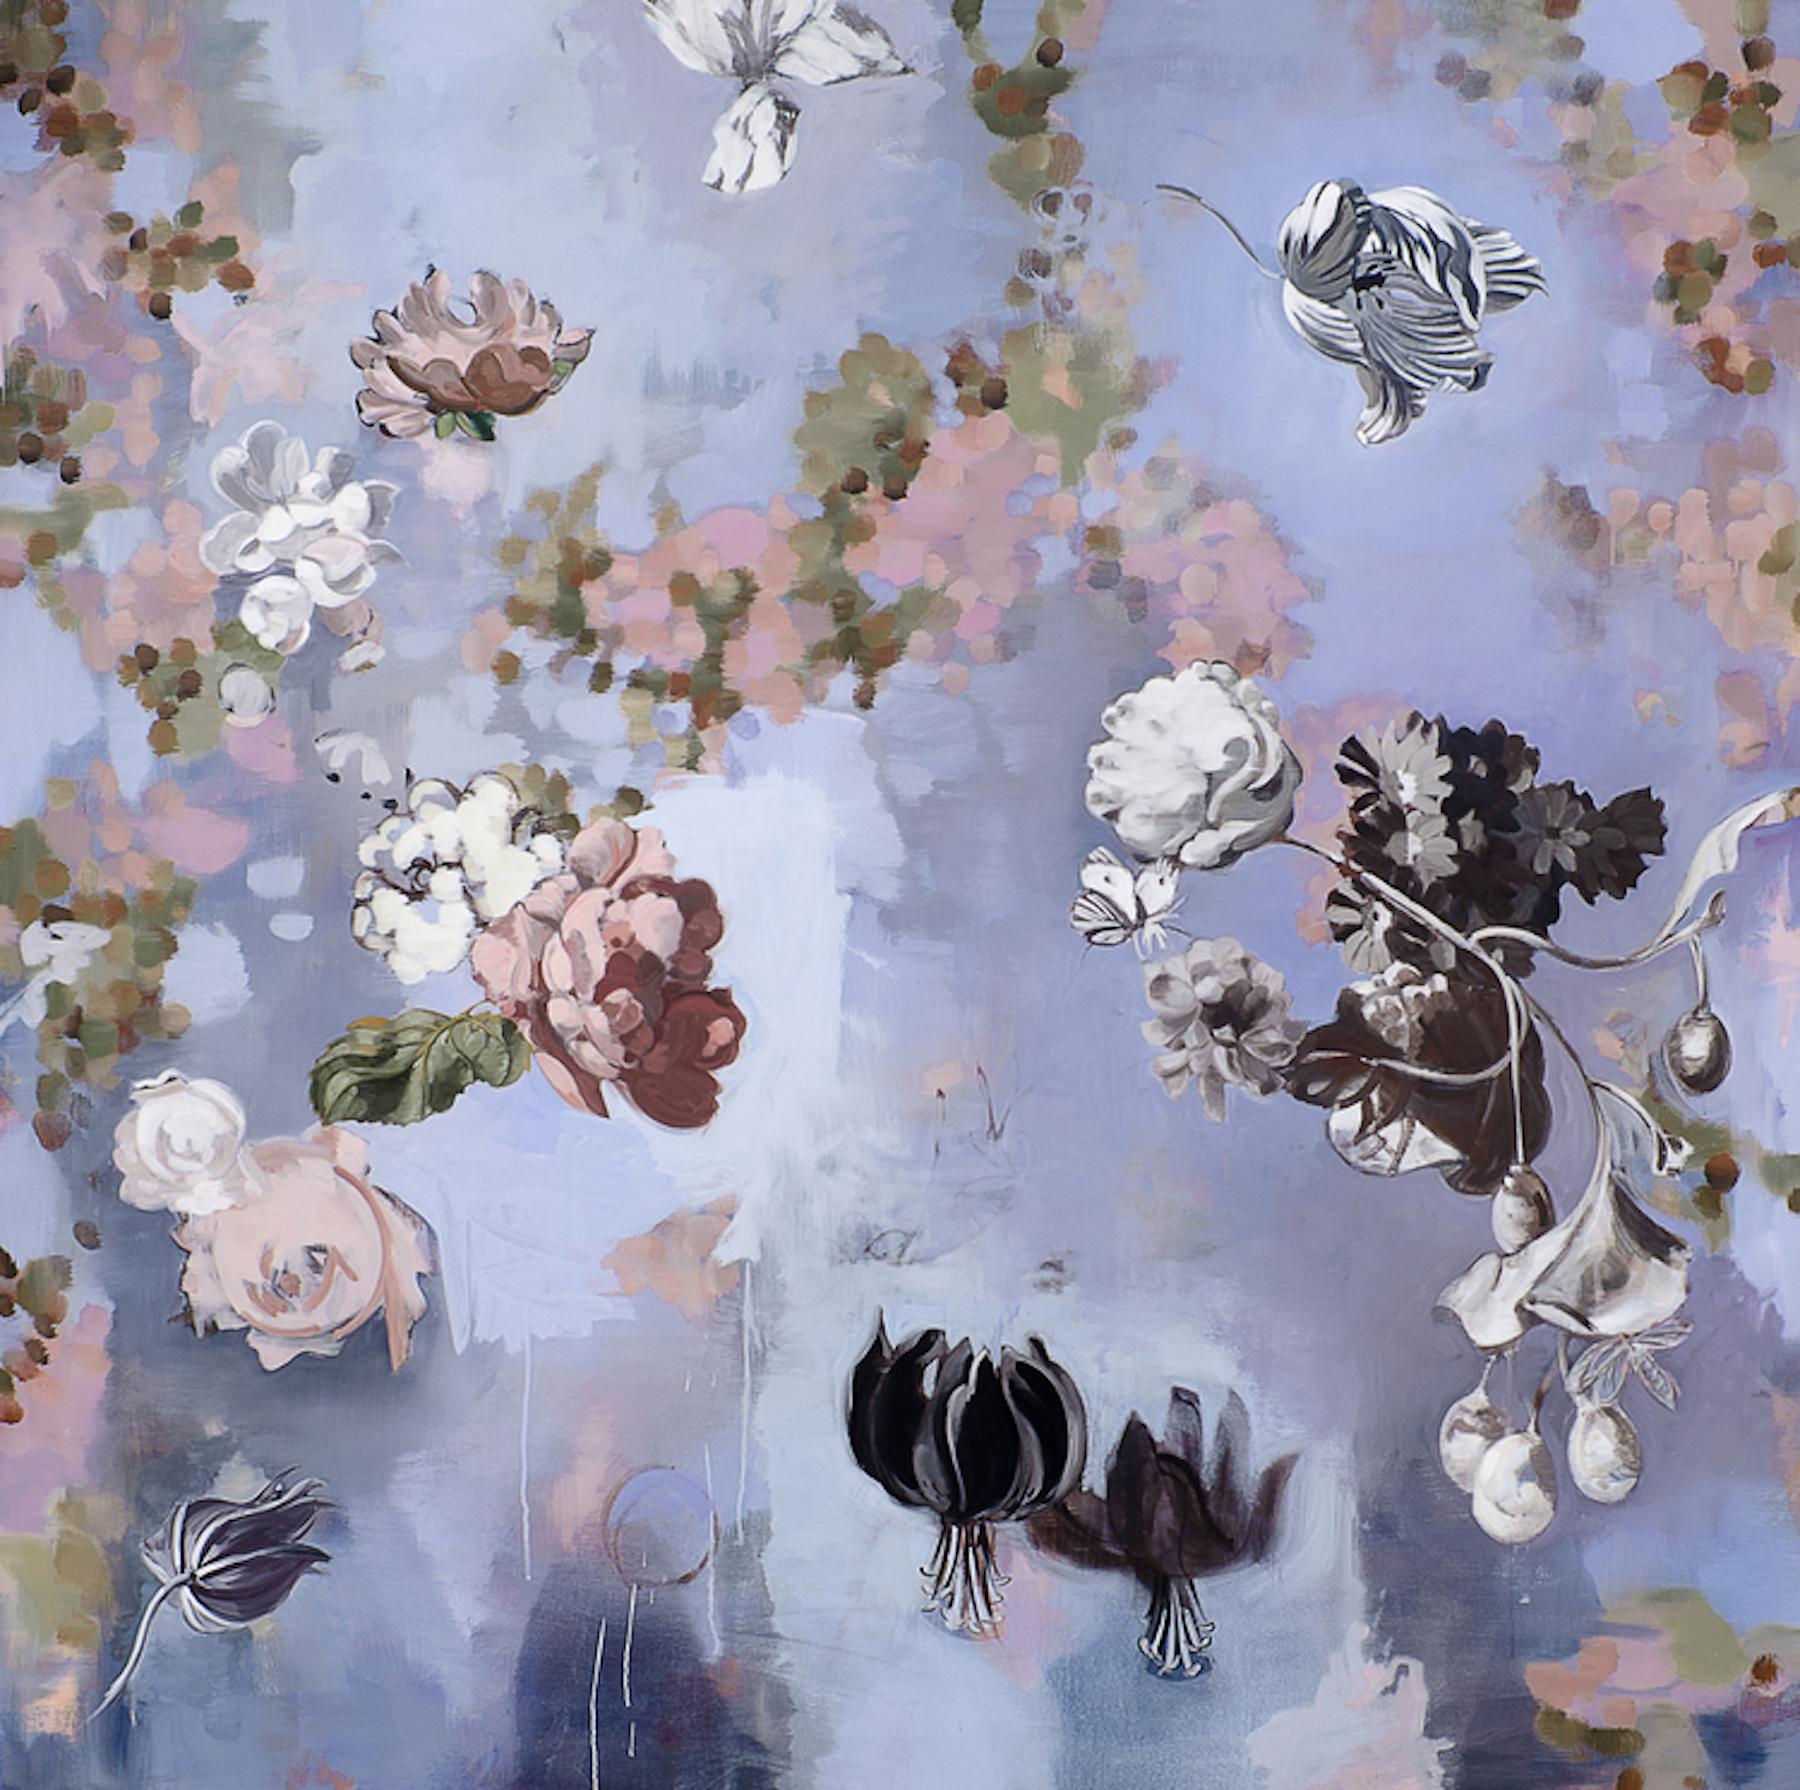 Til Paradise II - falling  flowers 72 x 72 inches